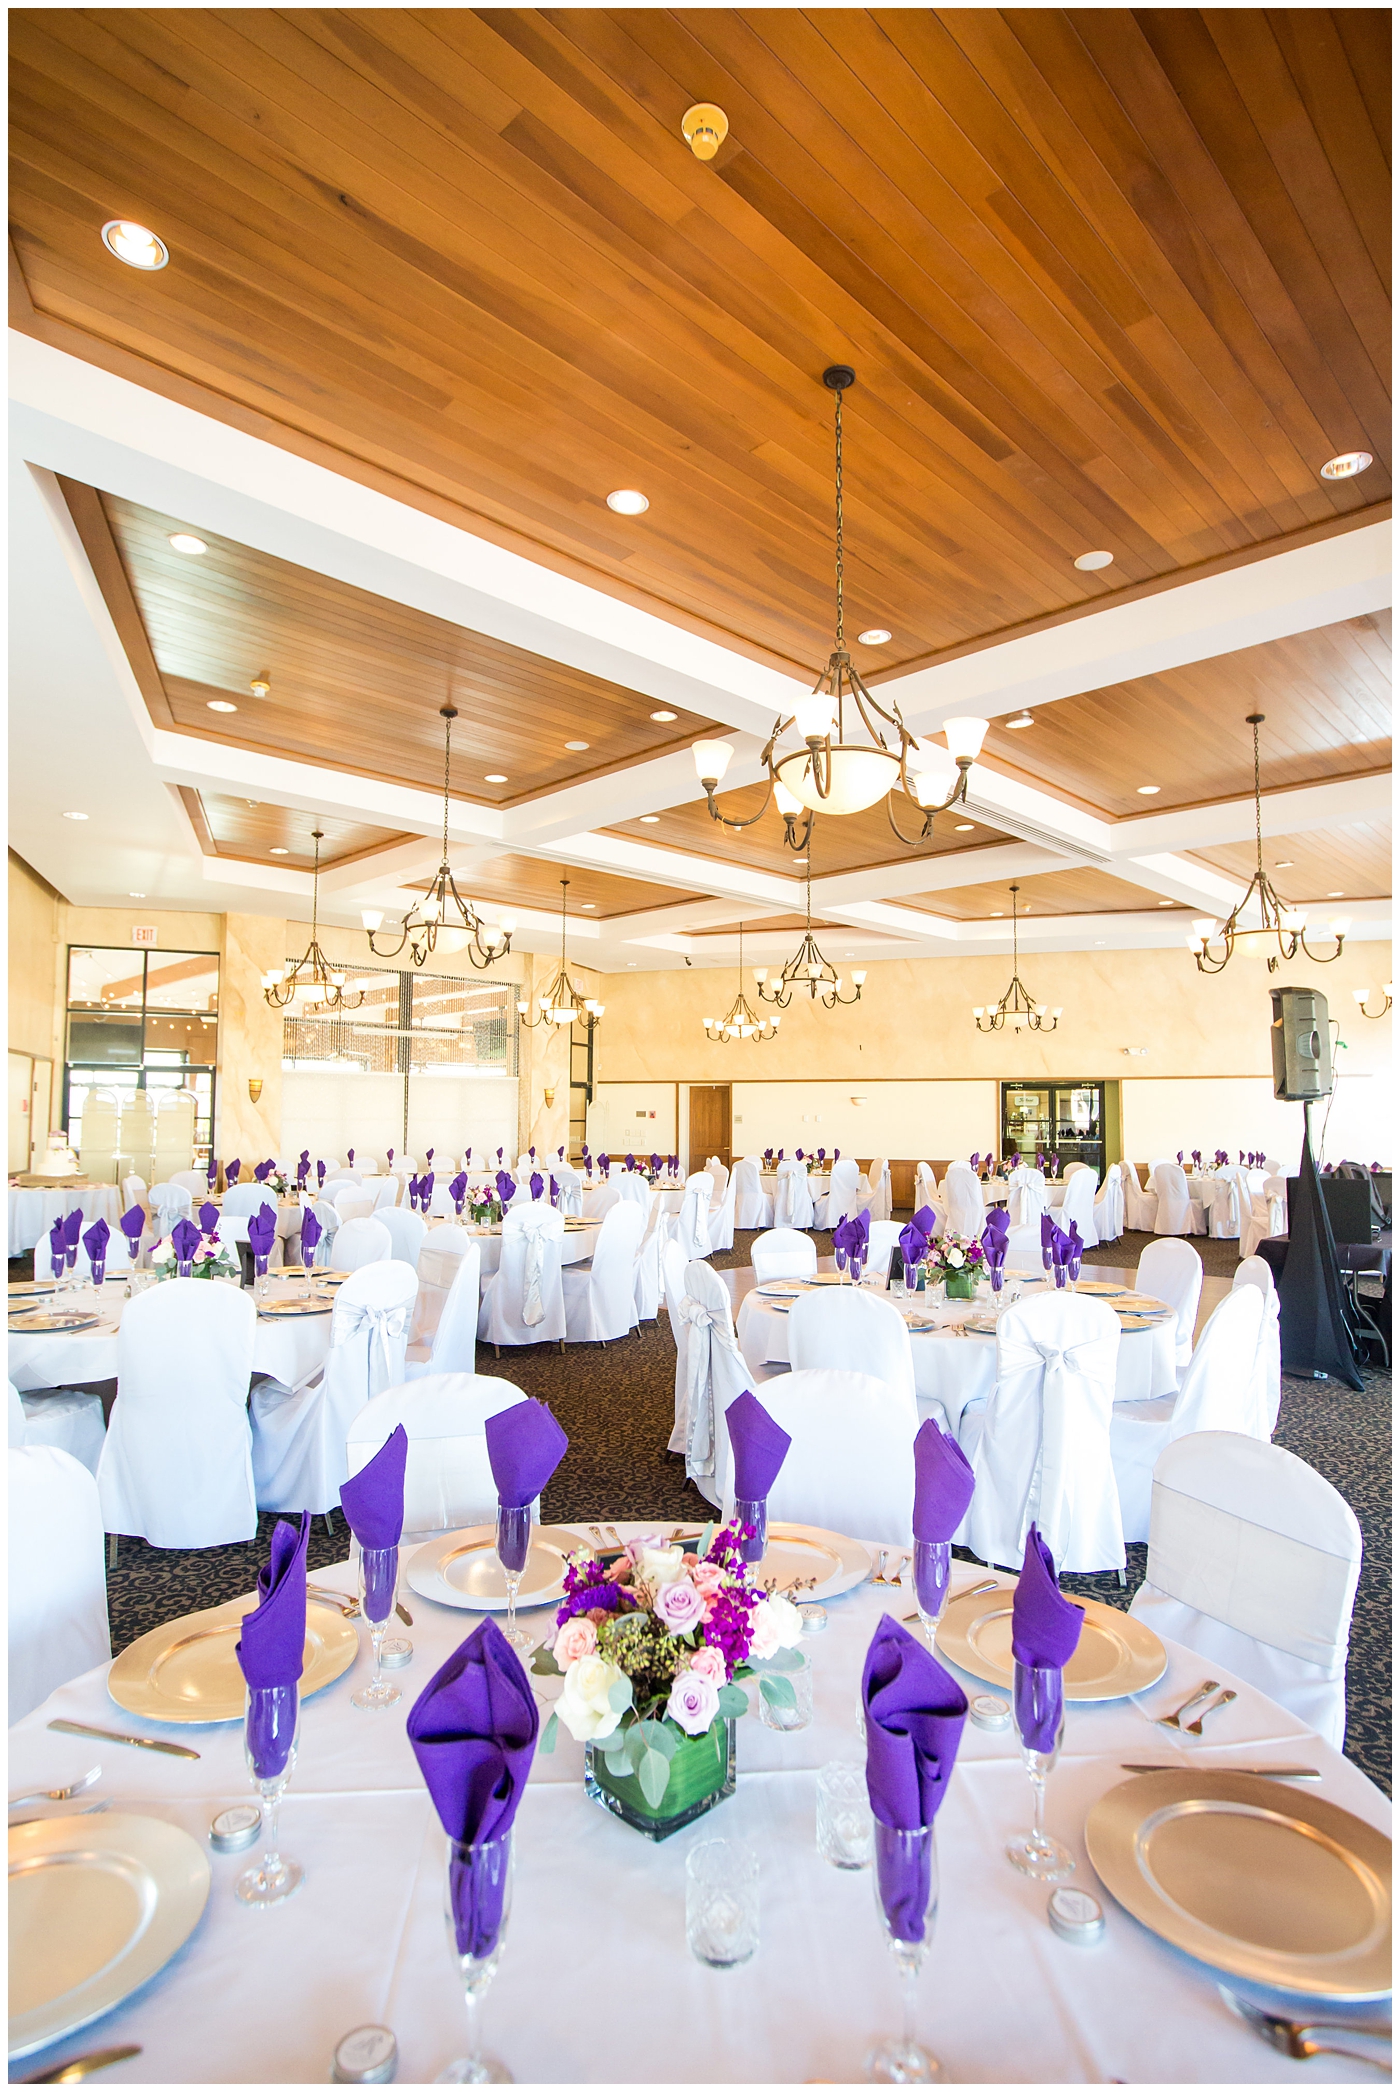 ballroom wedding reception with white chair covers, white table cloths, purple plum naplkins, lavendar roses and greenery centerpieces details